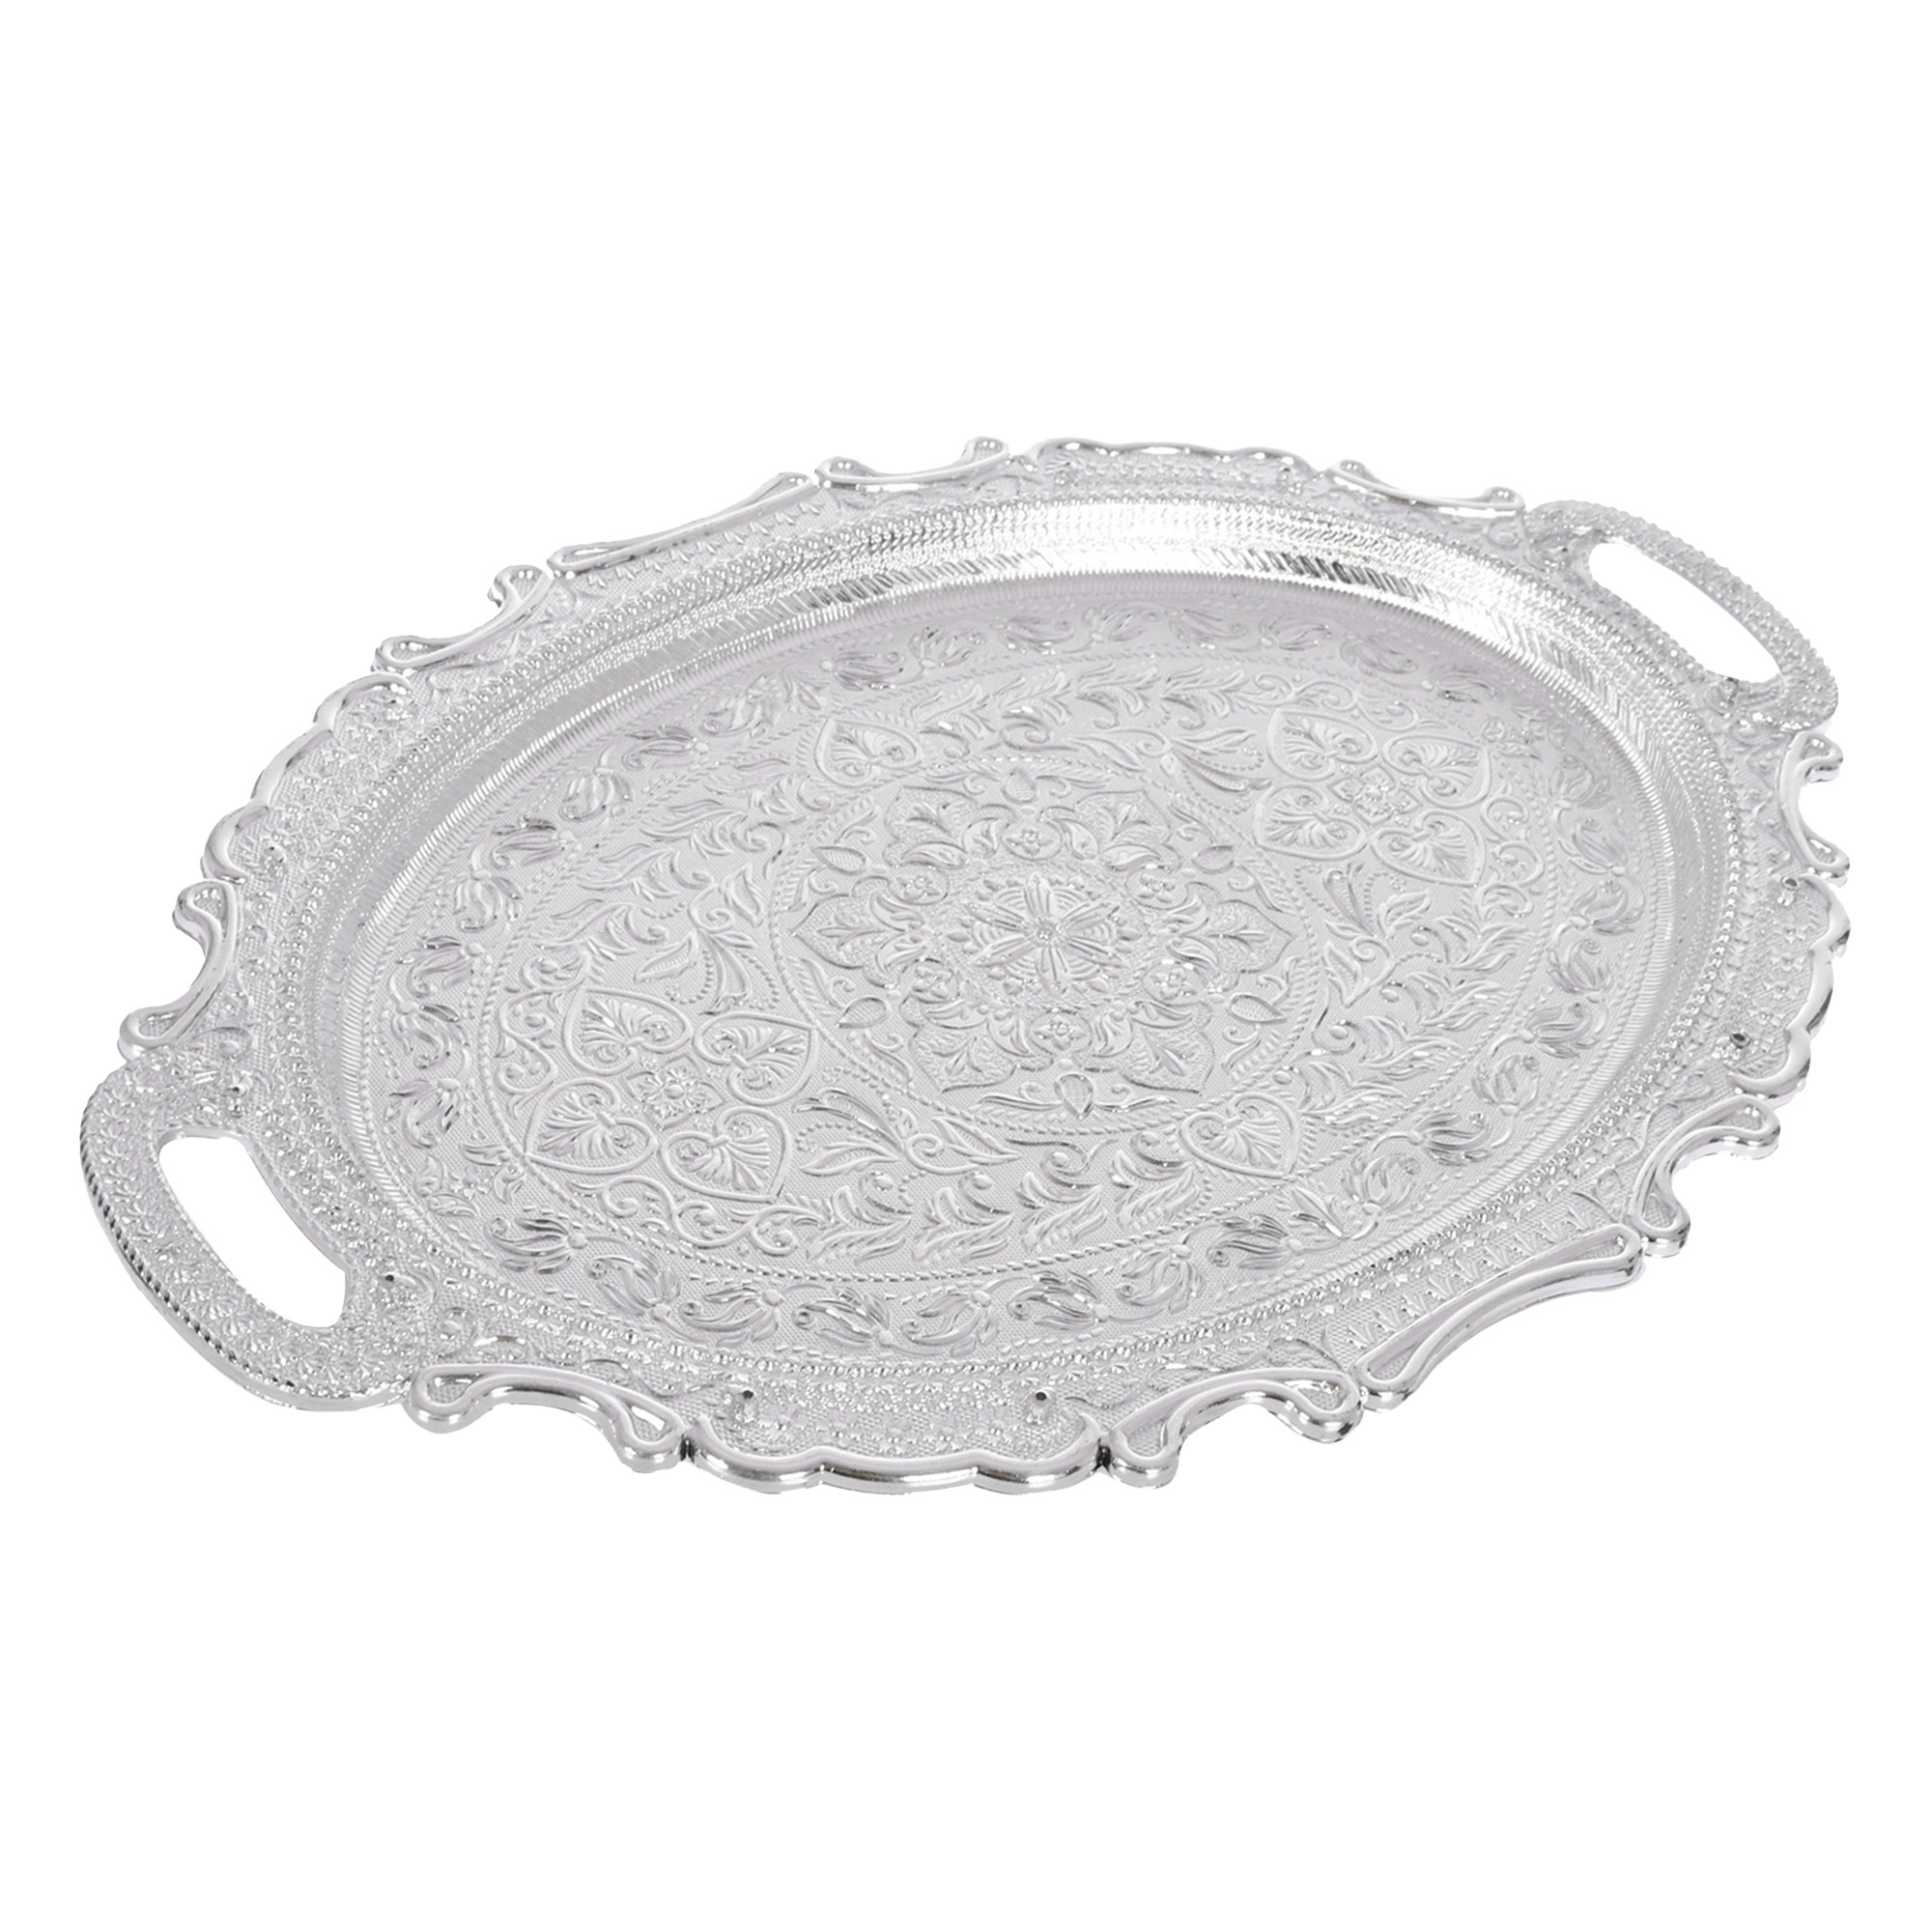 Kuber Industries Serving Tray | Serving Tray for Kitchen | Serving Tray for Guest | Serving Tray with Handles | Dining Table Tray | Serving Dish Tray | Serving Platter | Silver